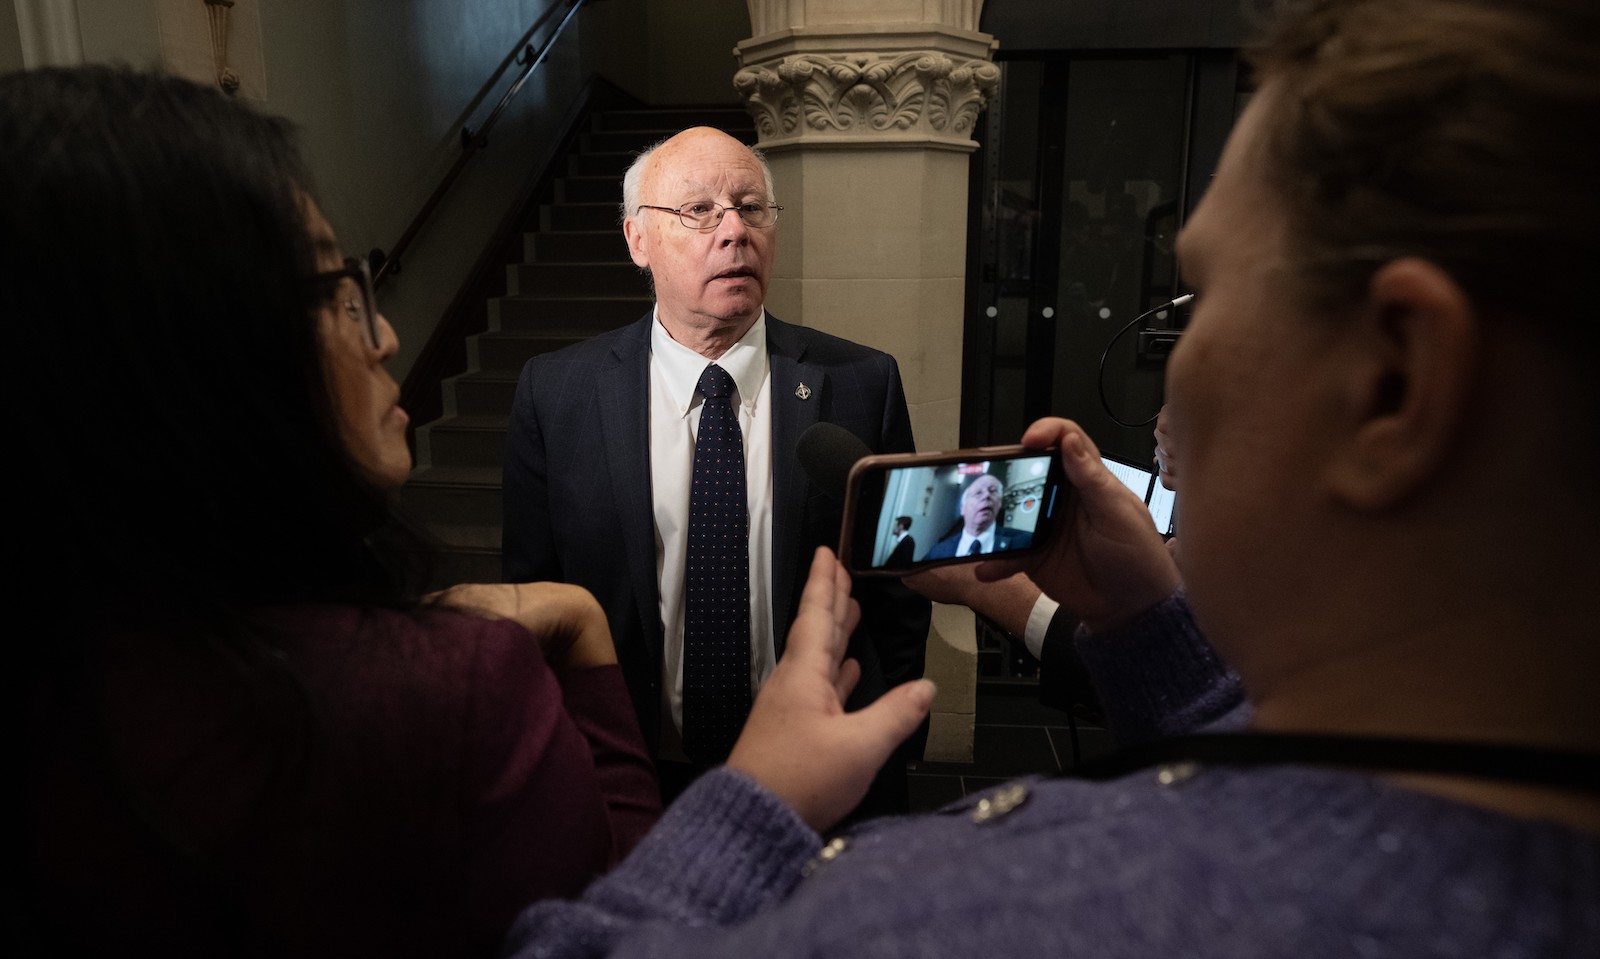 Ken Hardie has light skin, white hair and glasses. He wears a dark suit and is standing in front of a Corinthian column while a scrum of reporters interview him. In the foreground, a reporter in a blue sweater is making a video recording of Hardie on a smartphone.